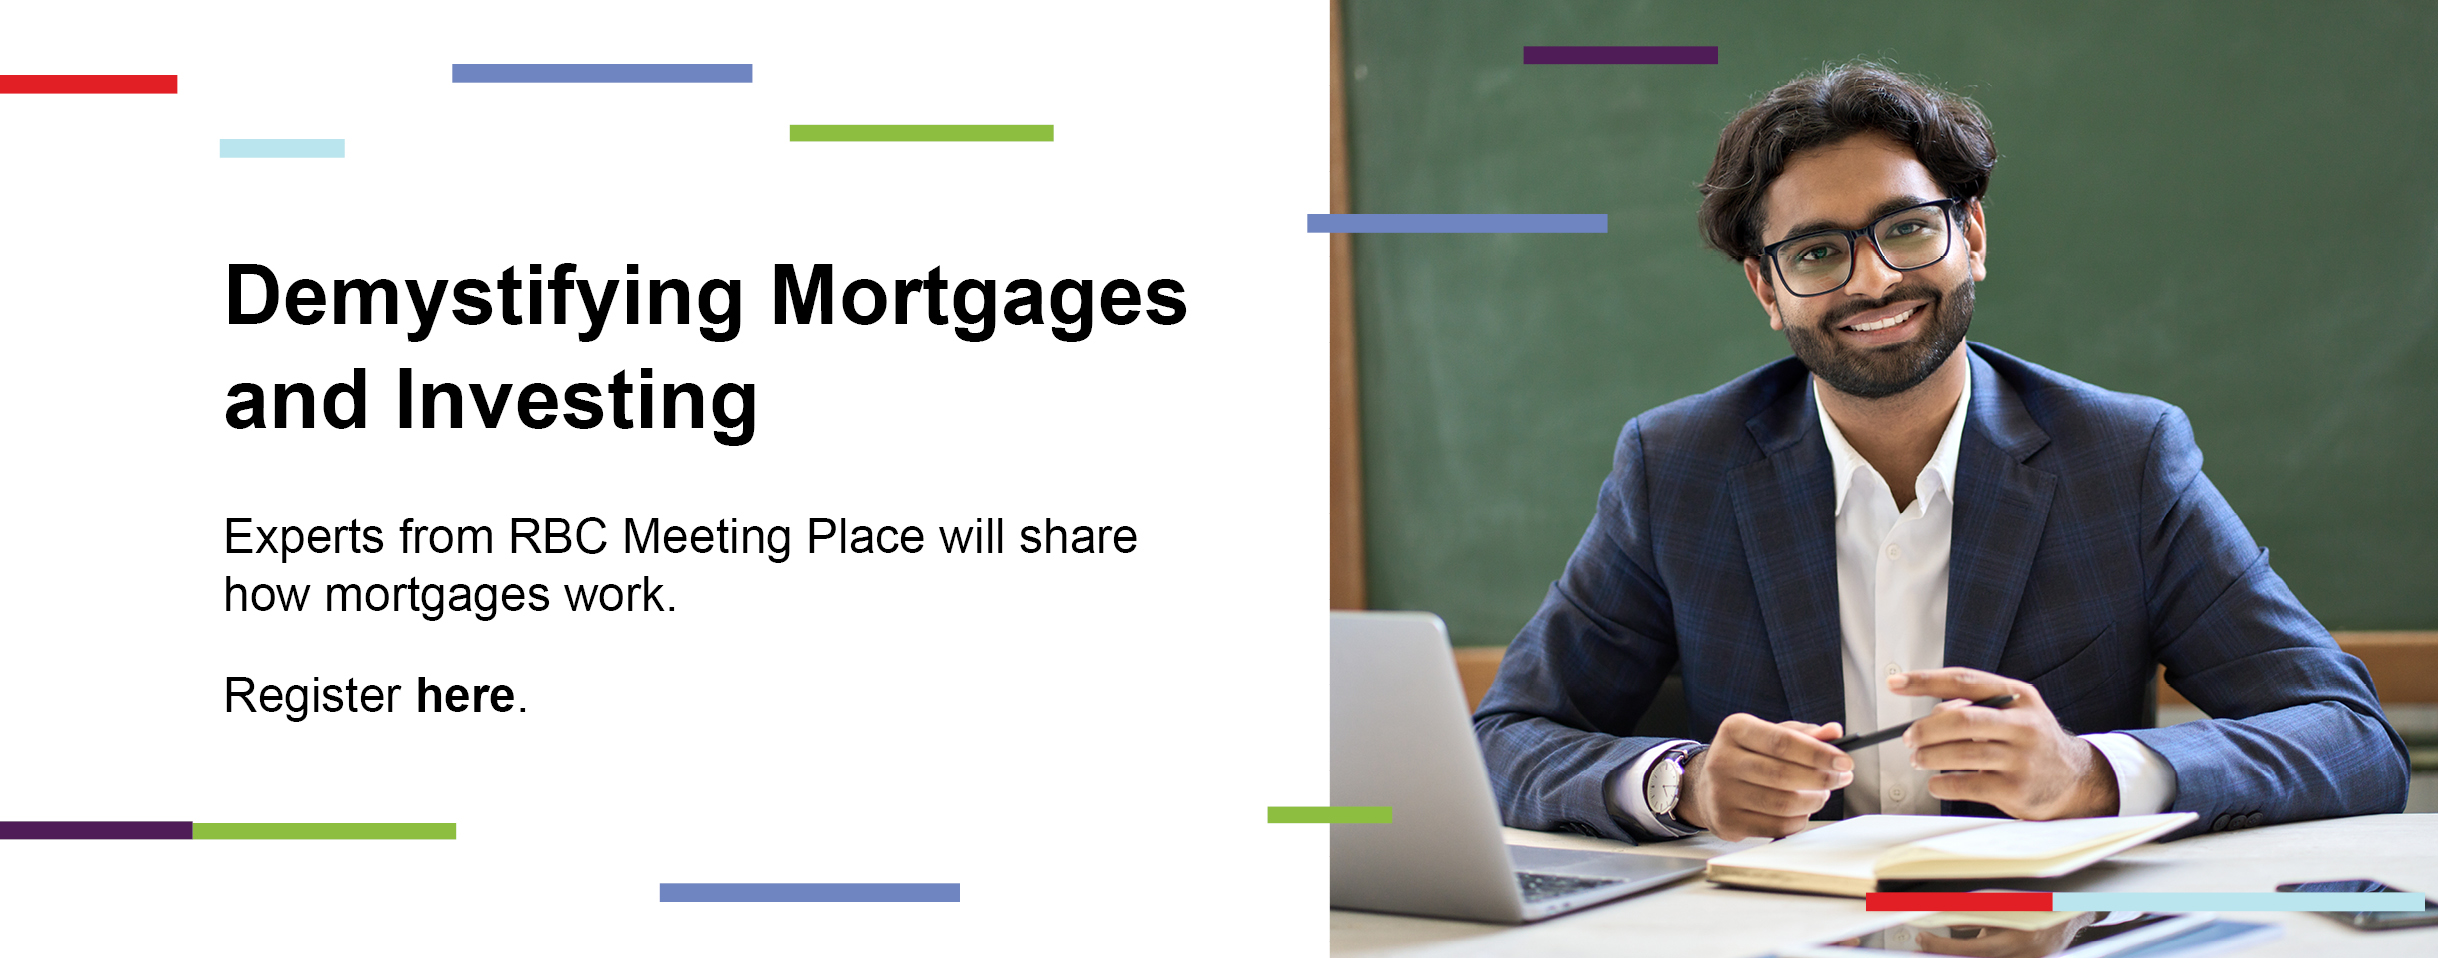 Demystifying mortgages and investing. Image of a young Indian man smiling behind a computer screen. 